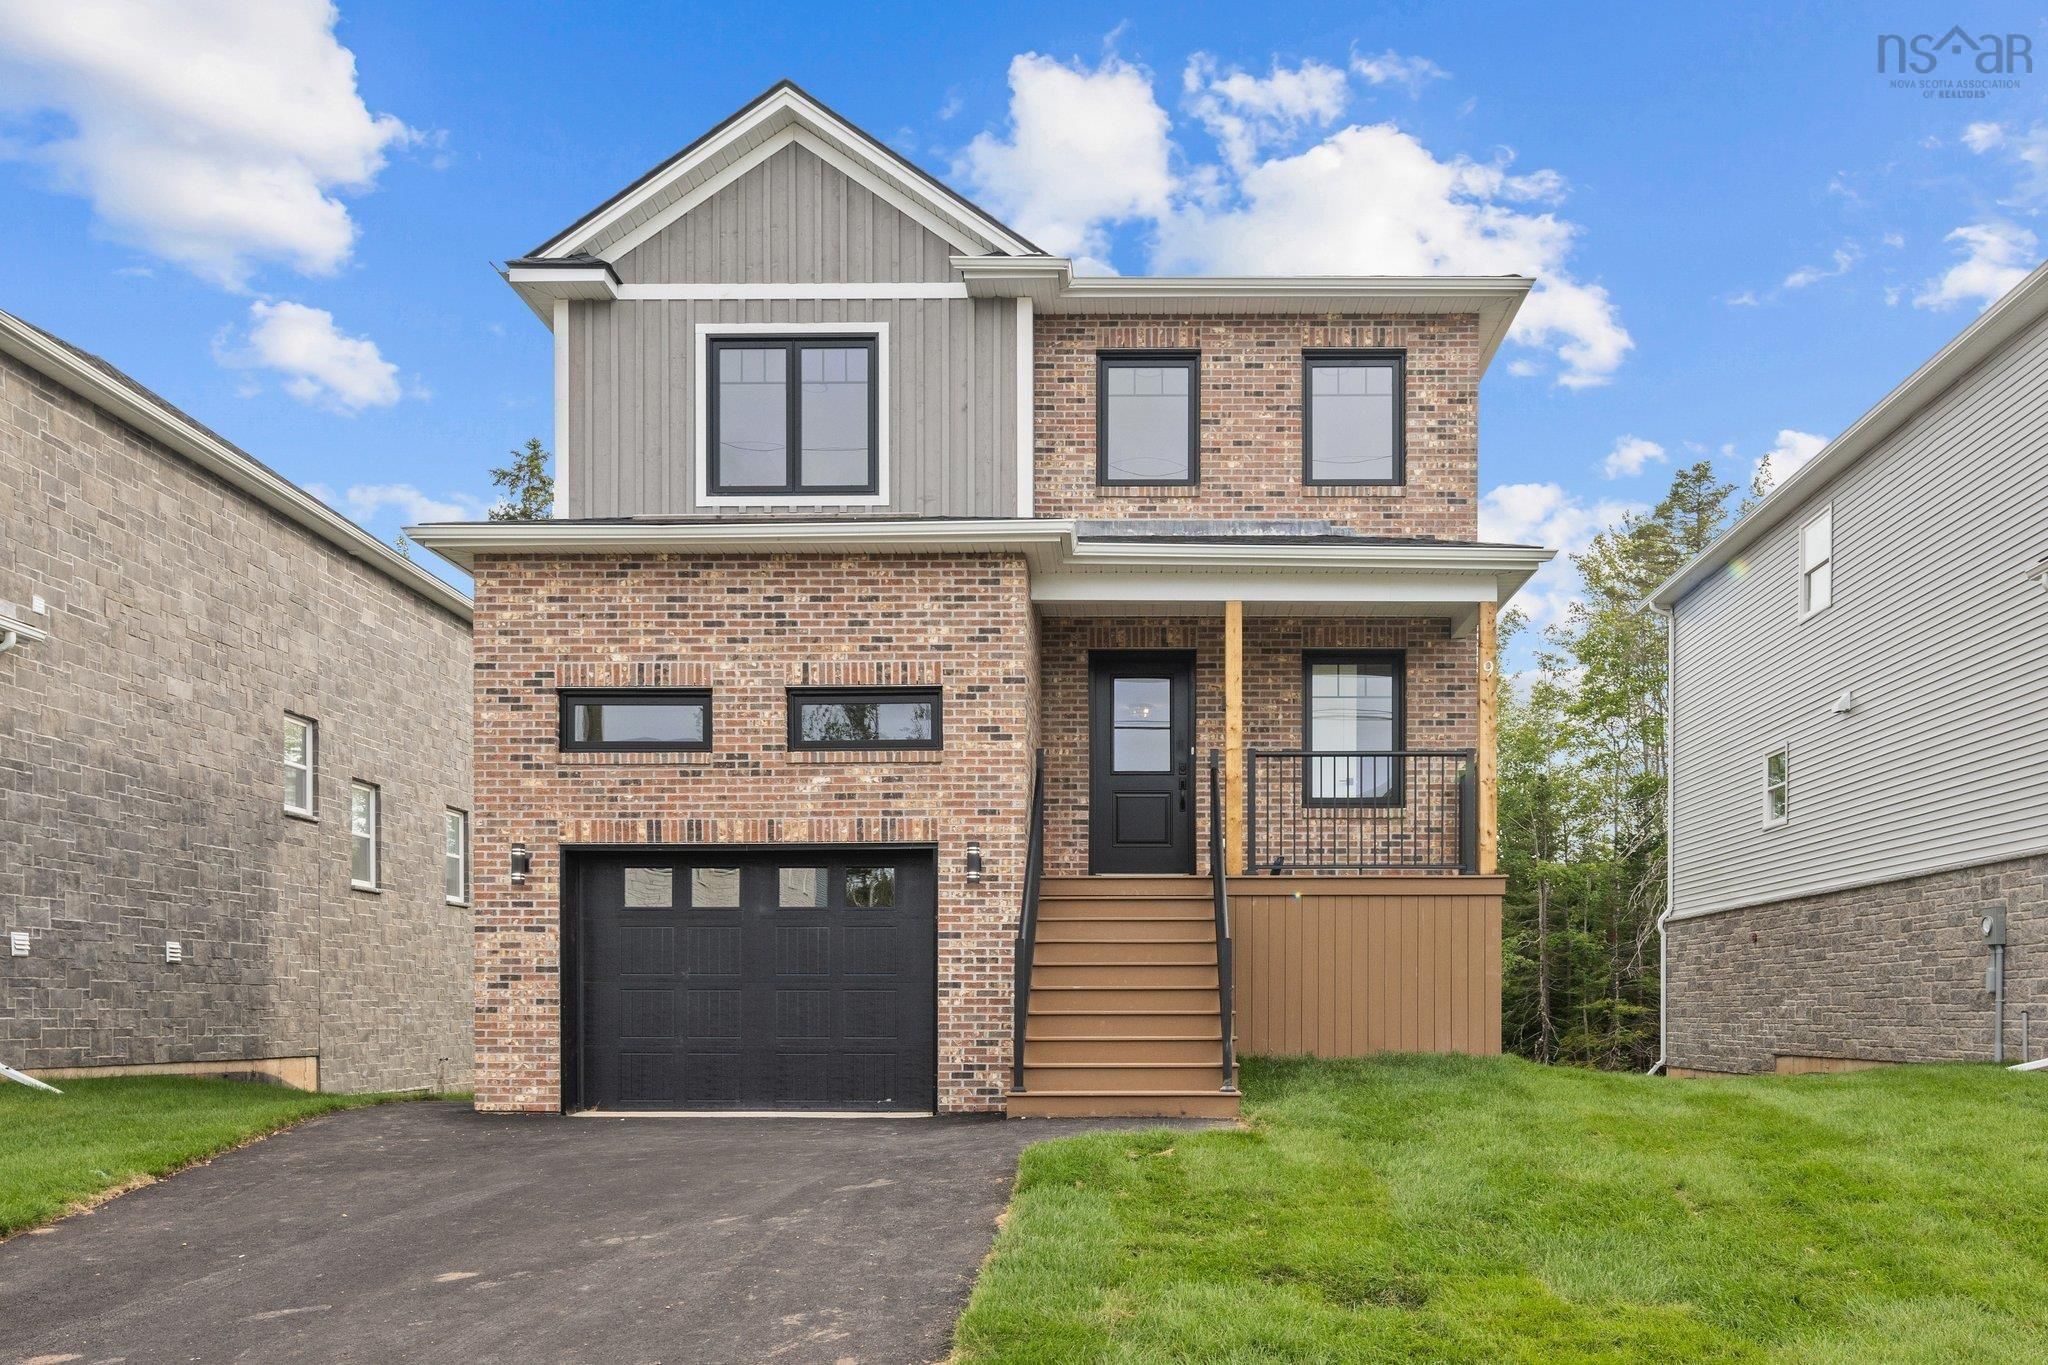 New property listed in 105-East Hants/Colchester West, Halifax-Dartmouth